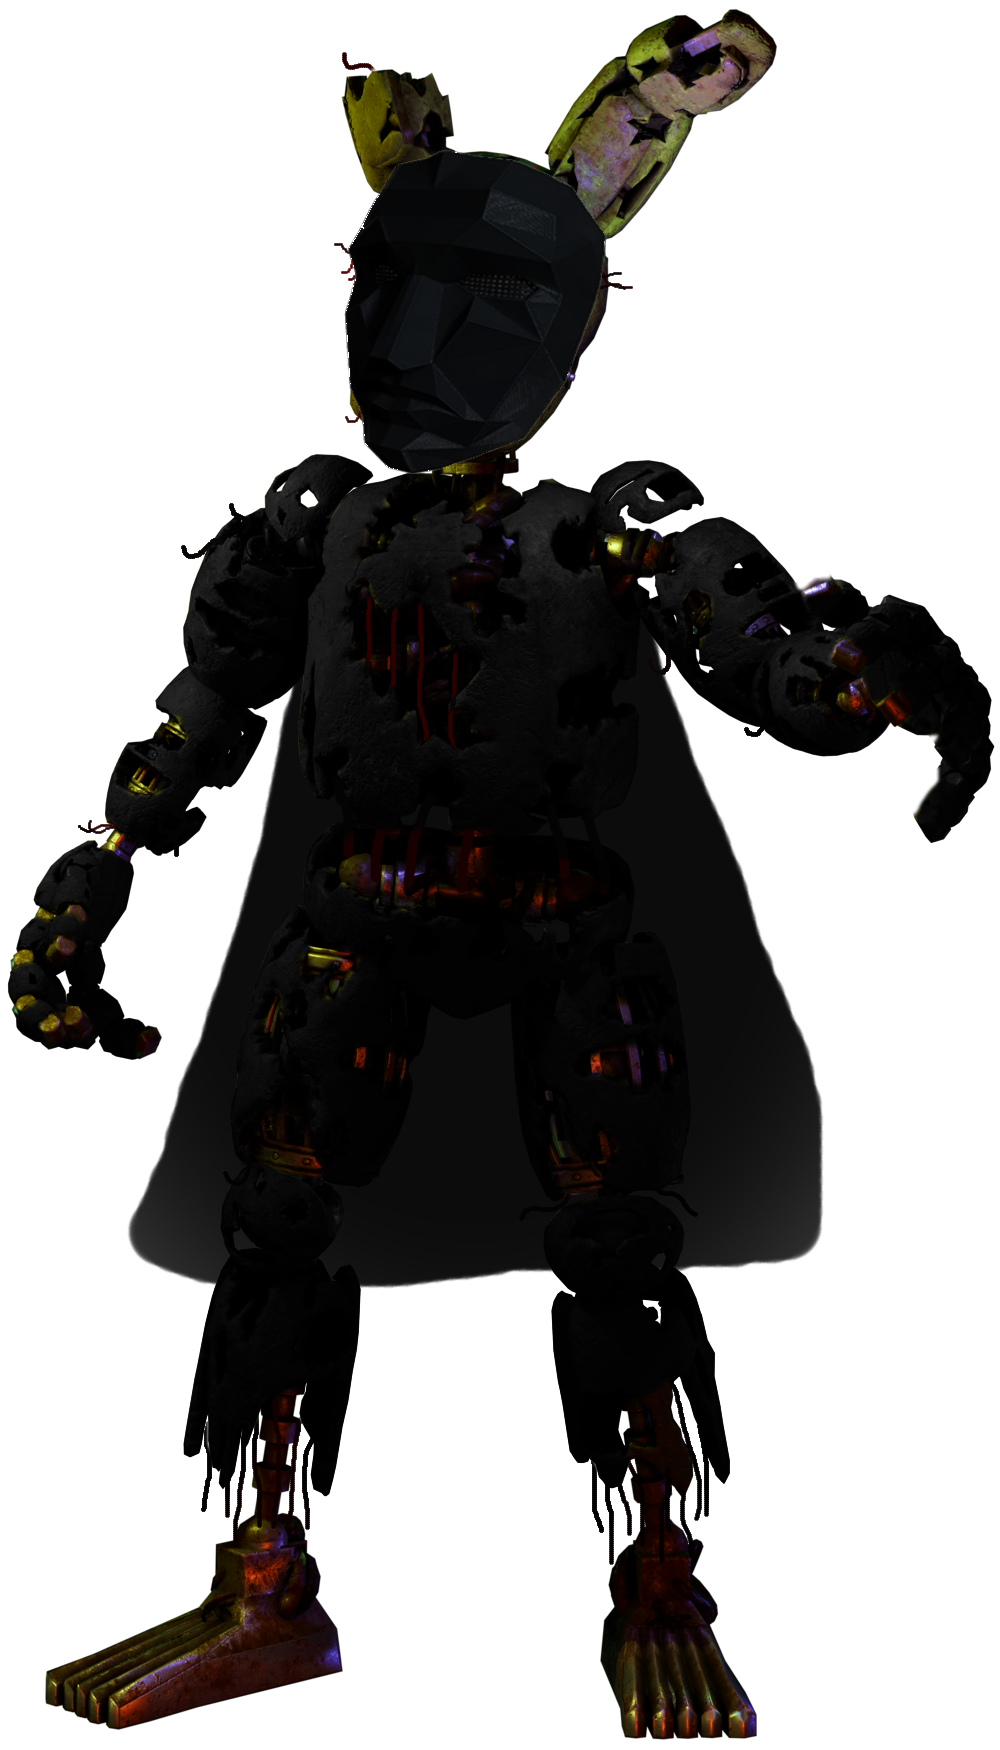 Shattered Springtrap (FNaF AR Skin Concept) by ToxiinGames on